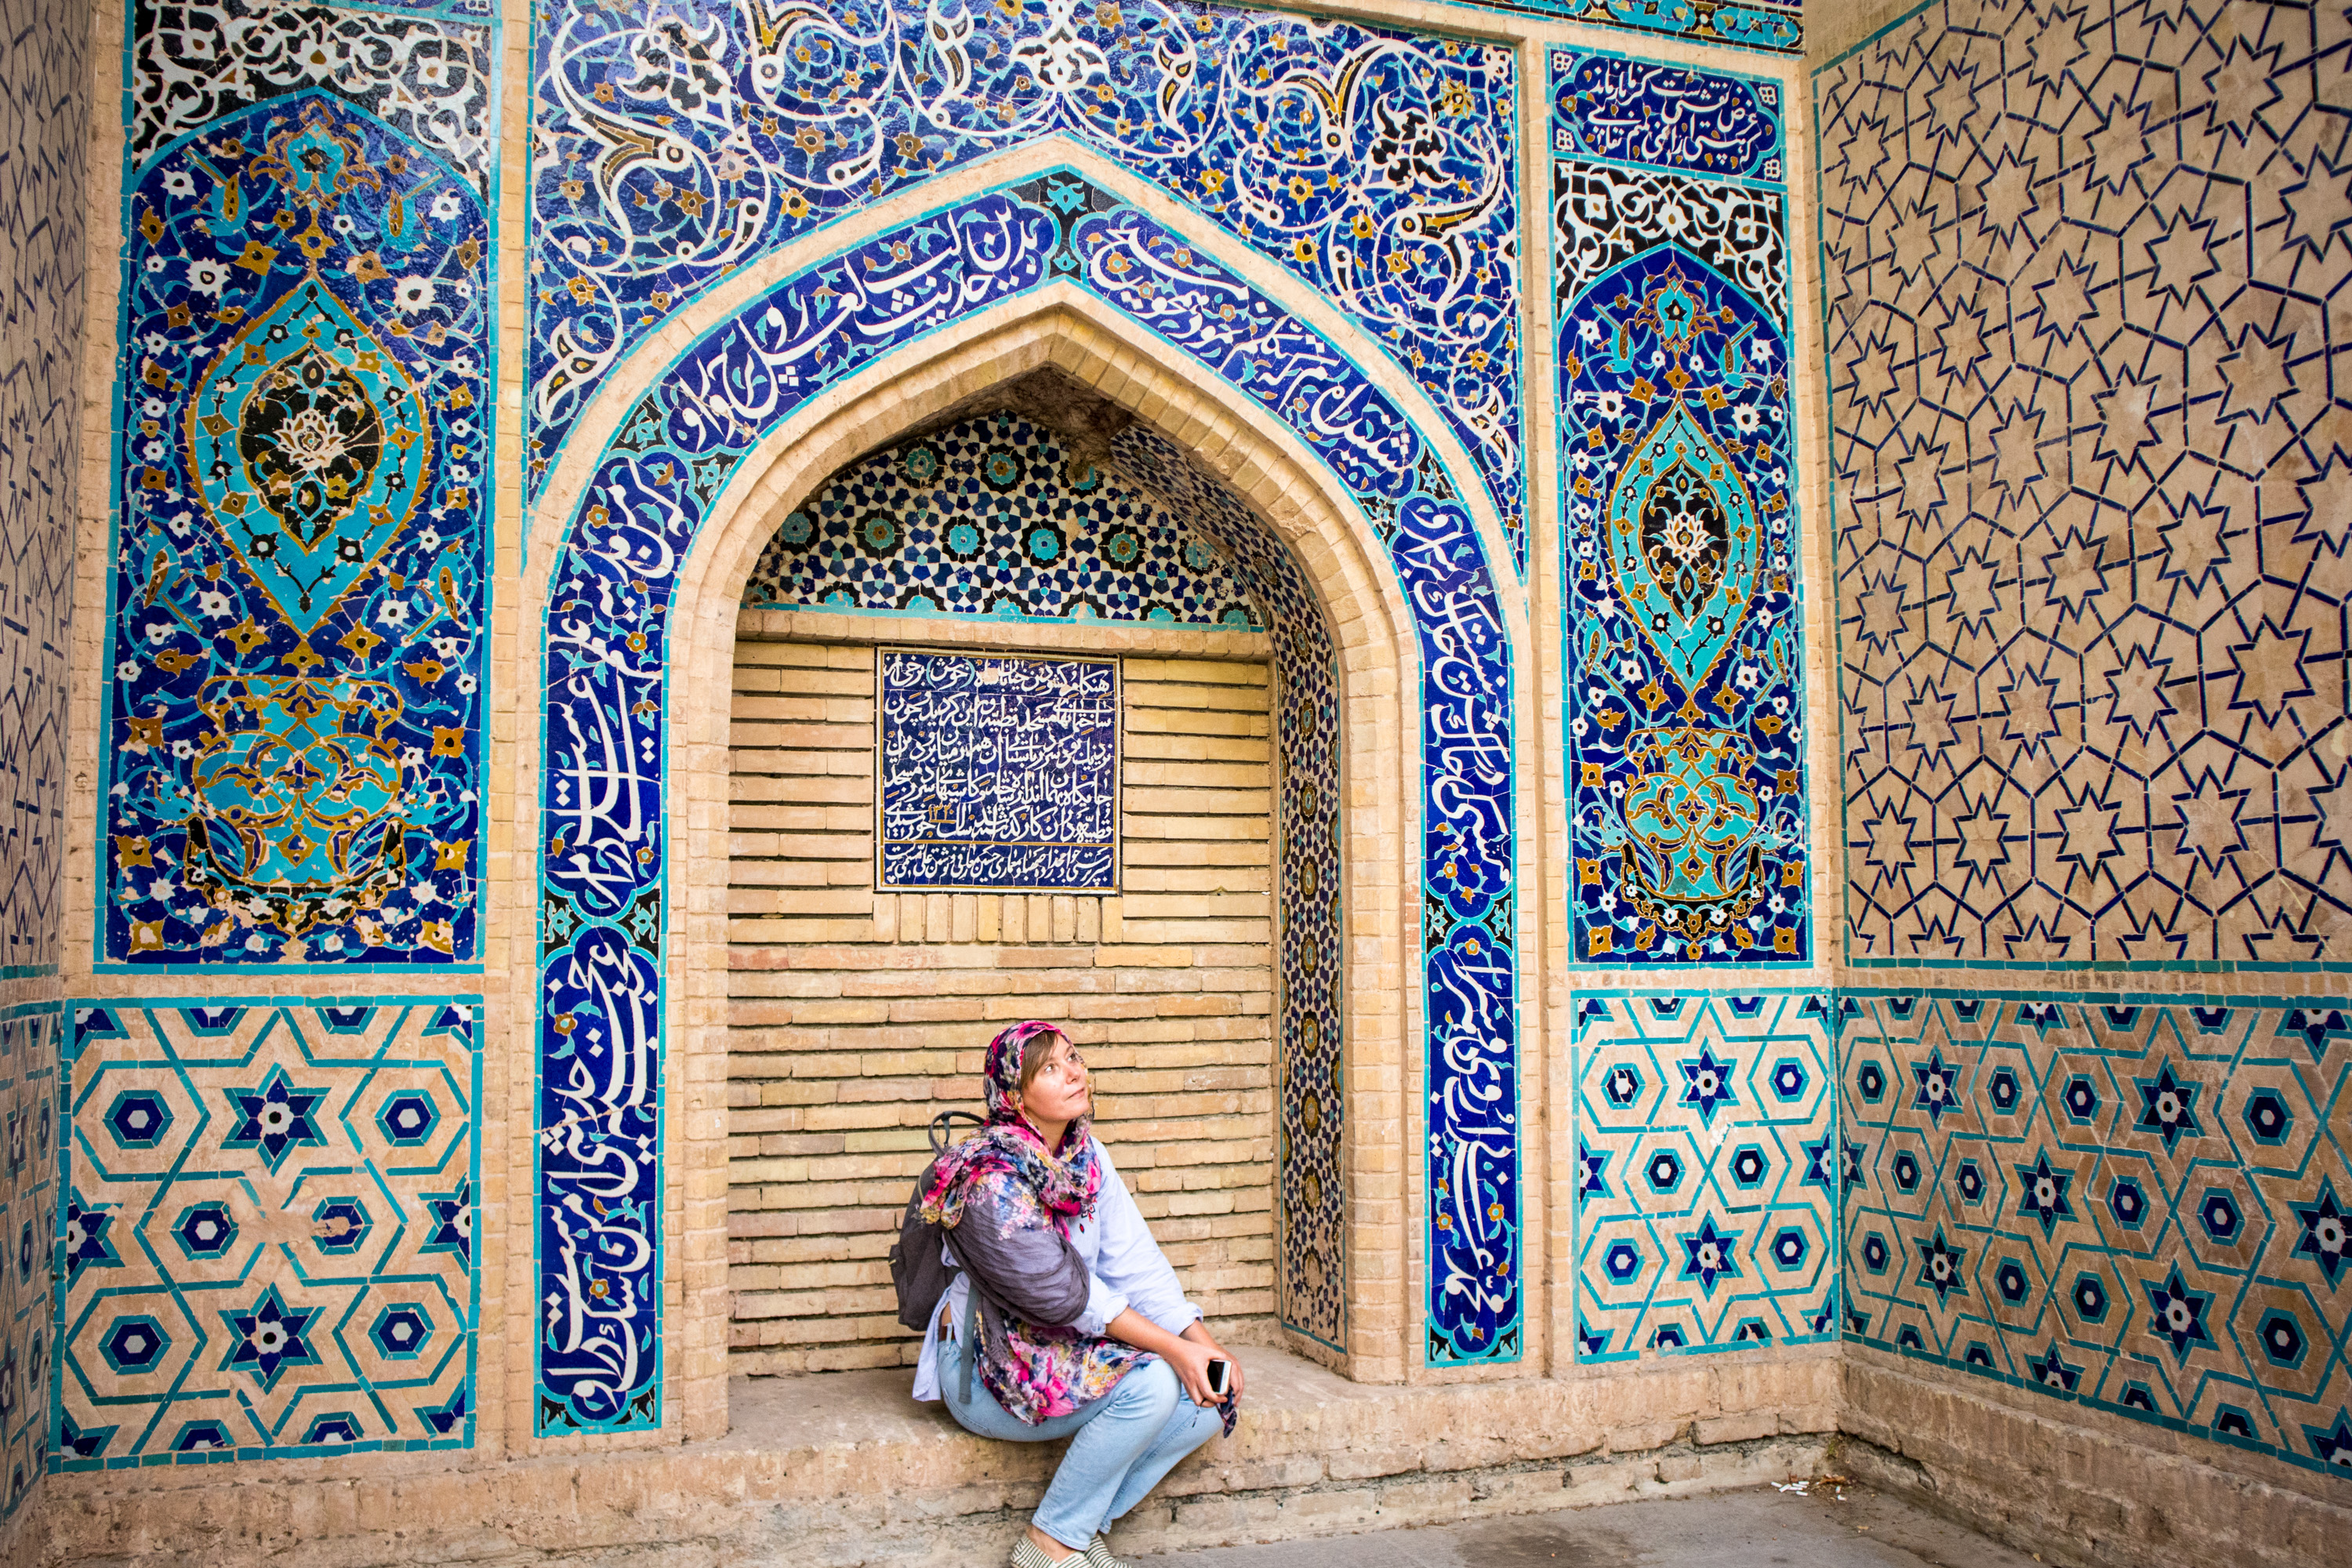 Teen chat in Isfahan